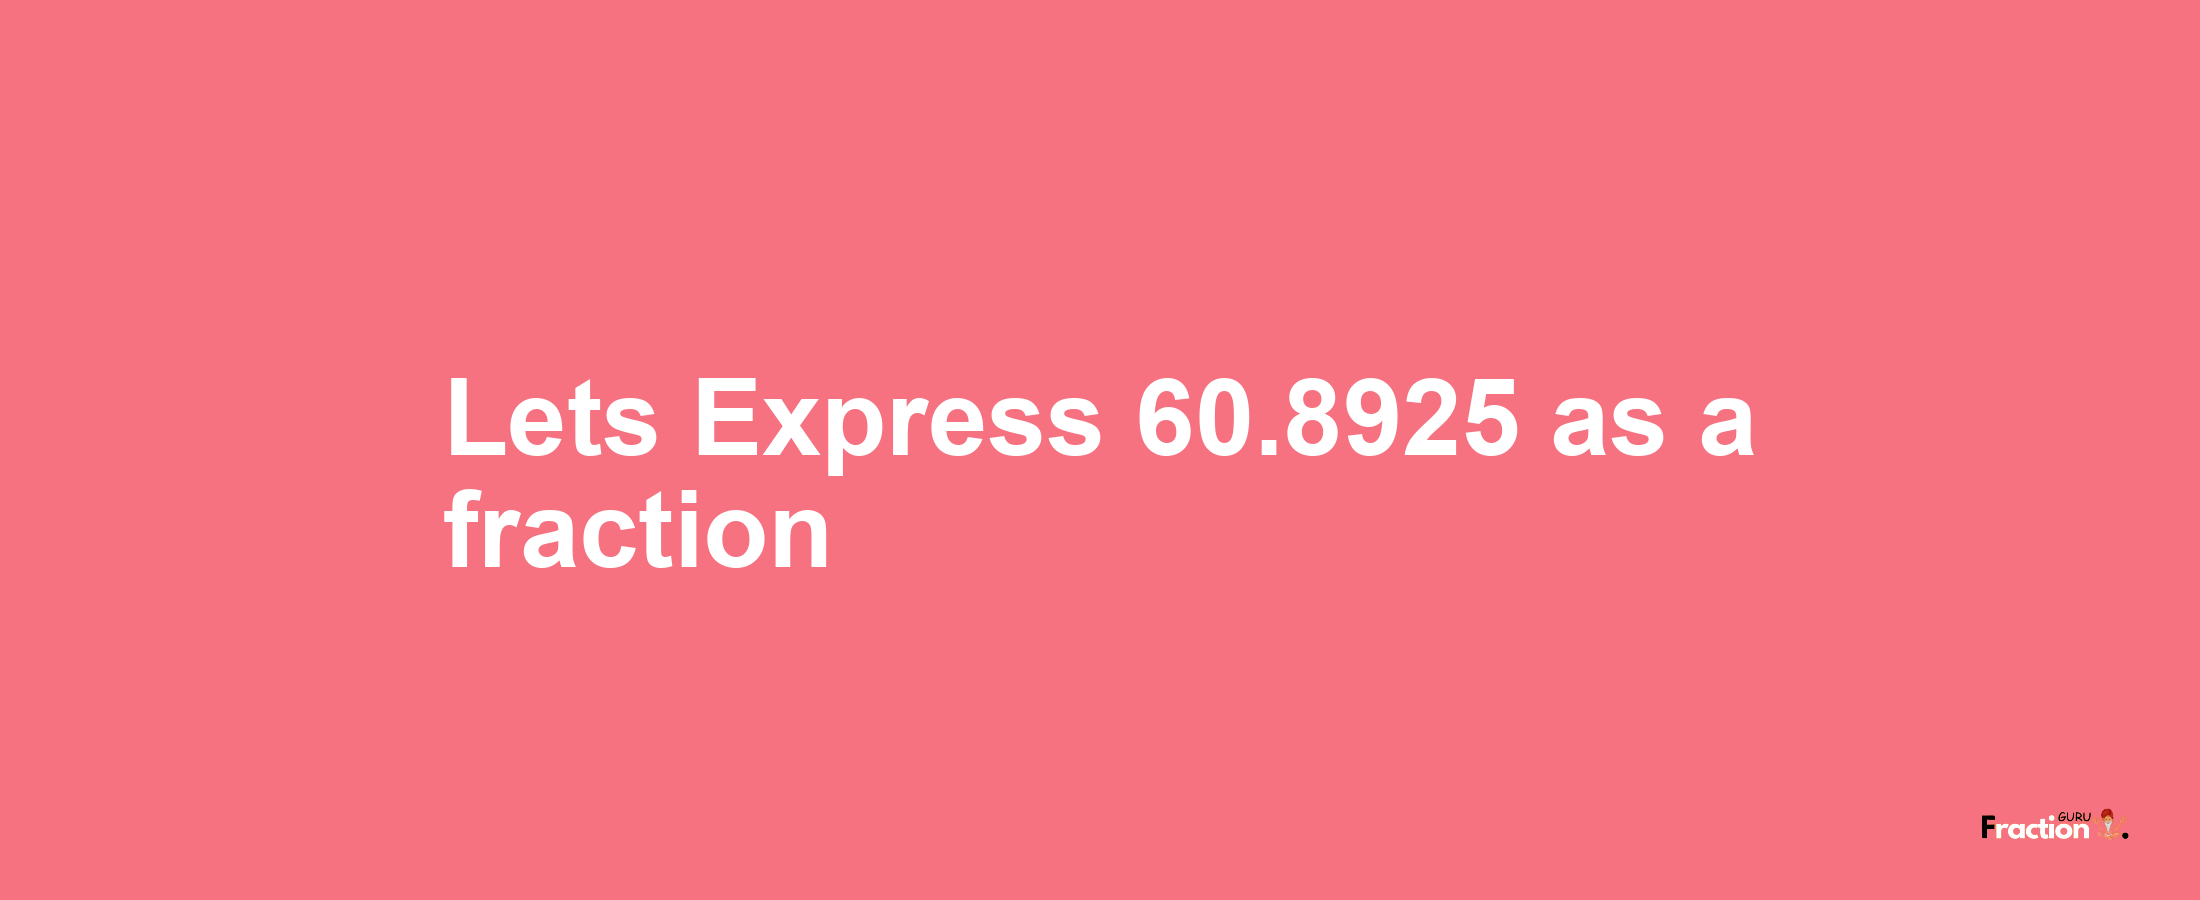 Lets Express 60.8925 as afraction